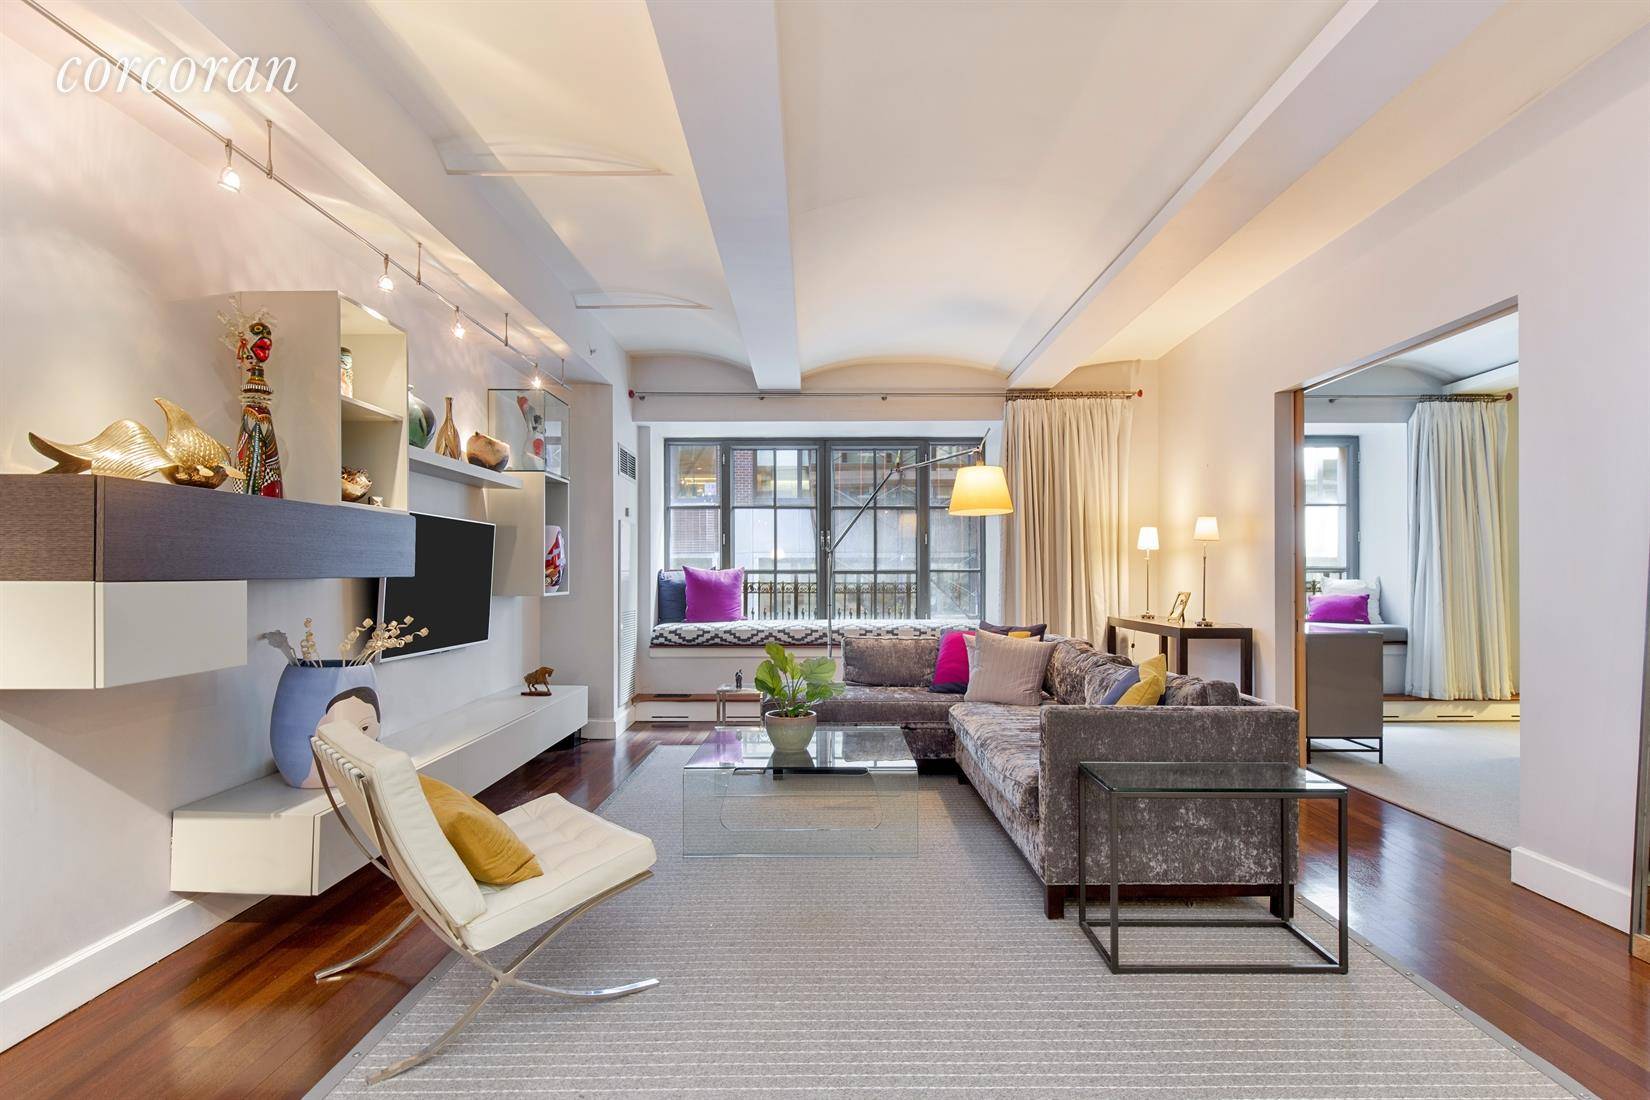 SIGNED LEASE. Located across the street from Lincoln Center in an exquisite building designed by Costas Kondylis, this 1688 sq ft mint condo loft has high end finishes and is ...